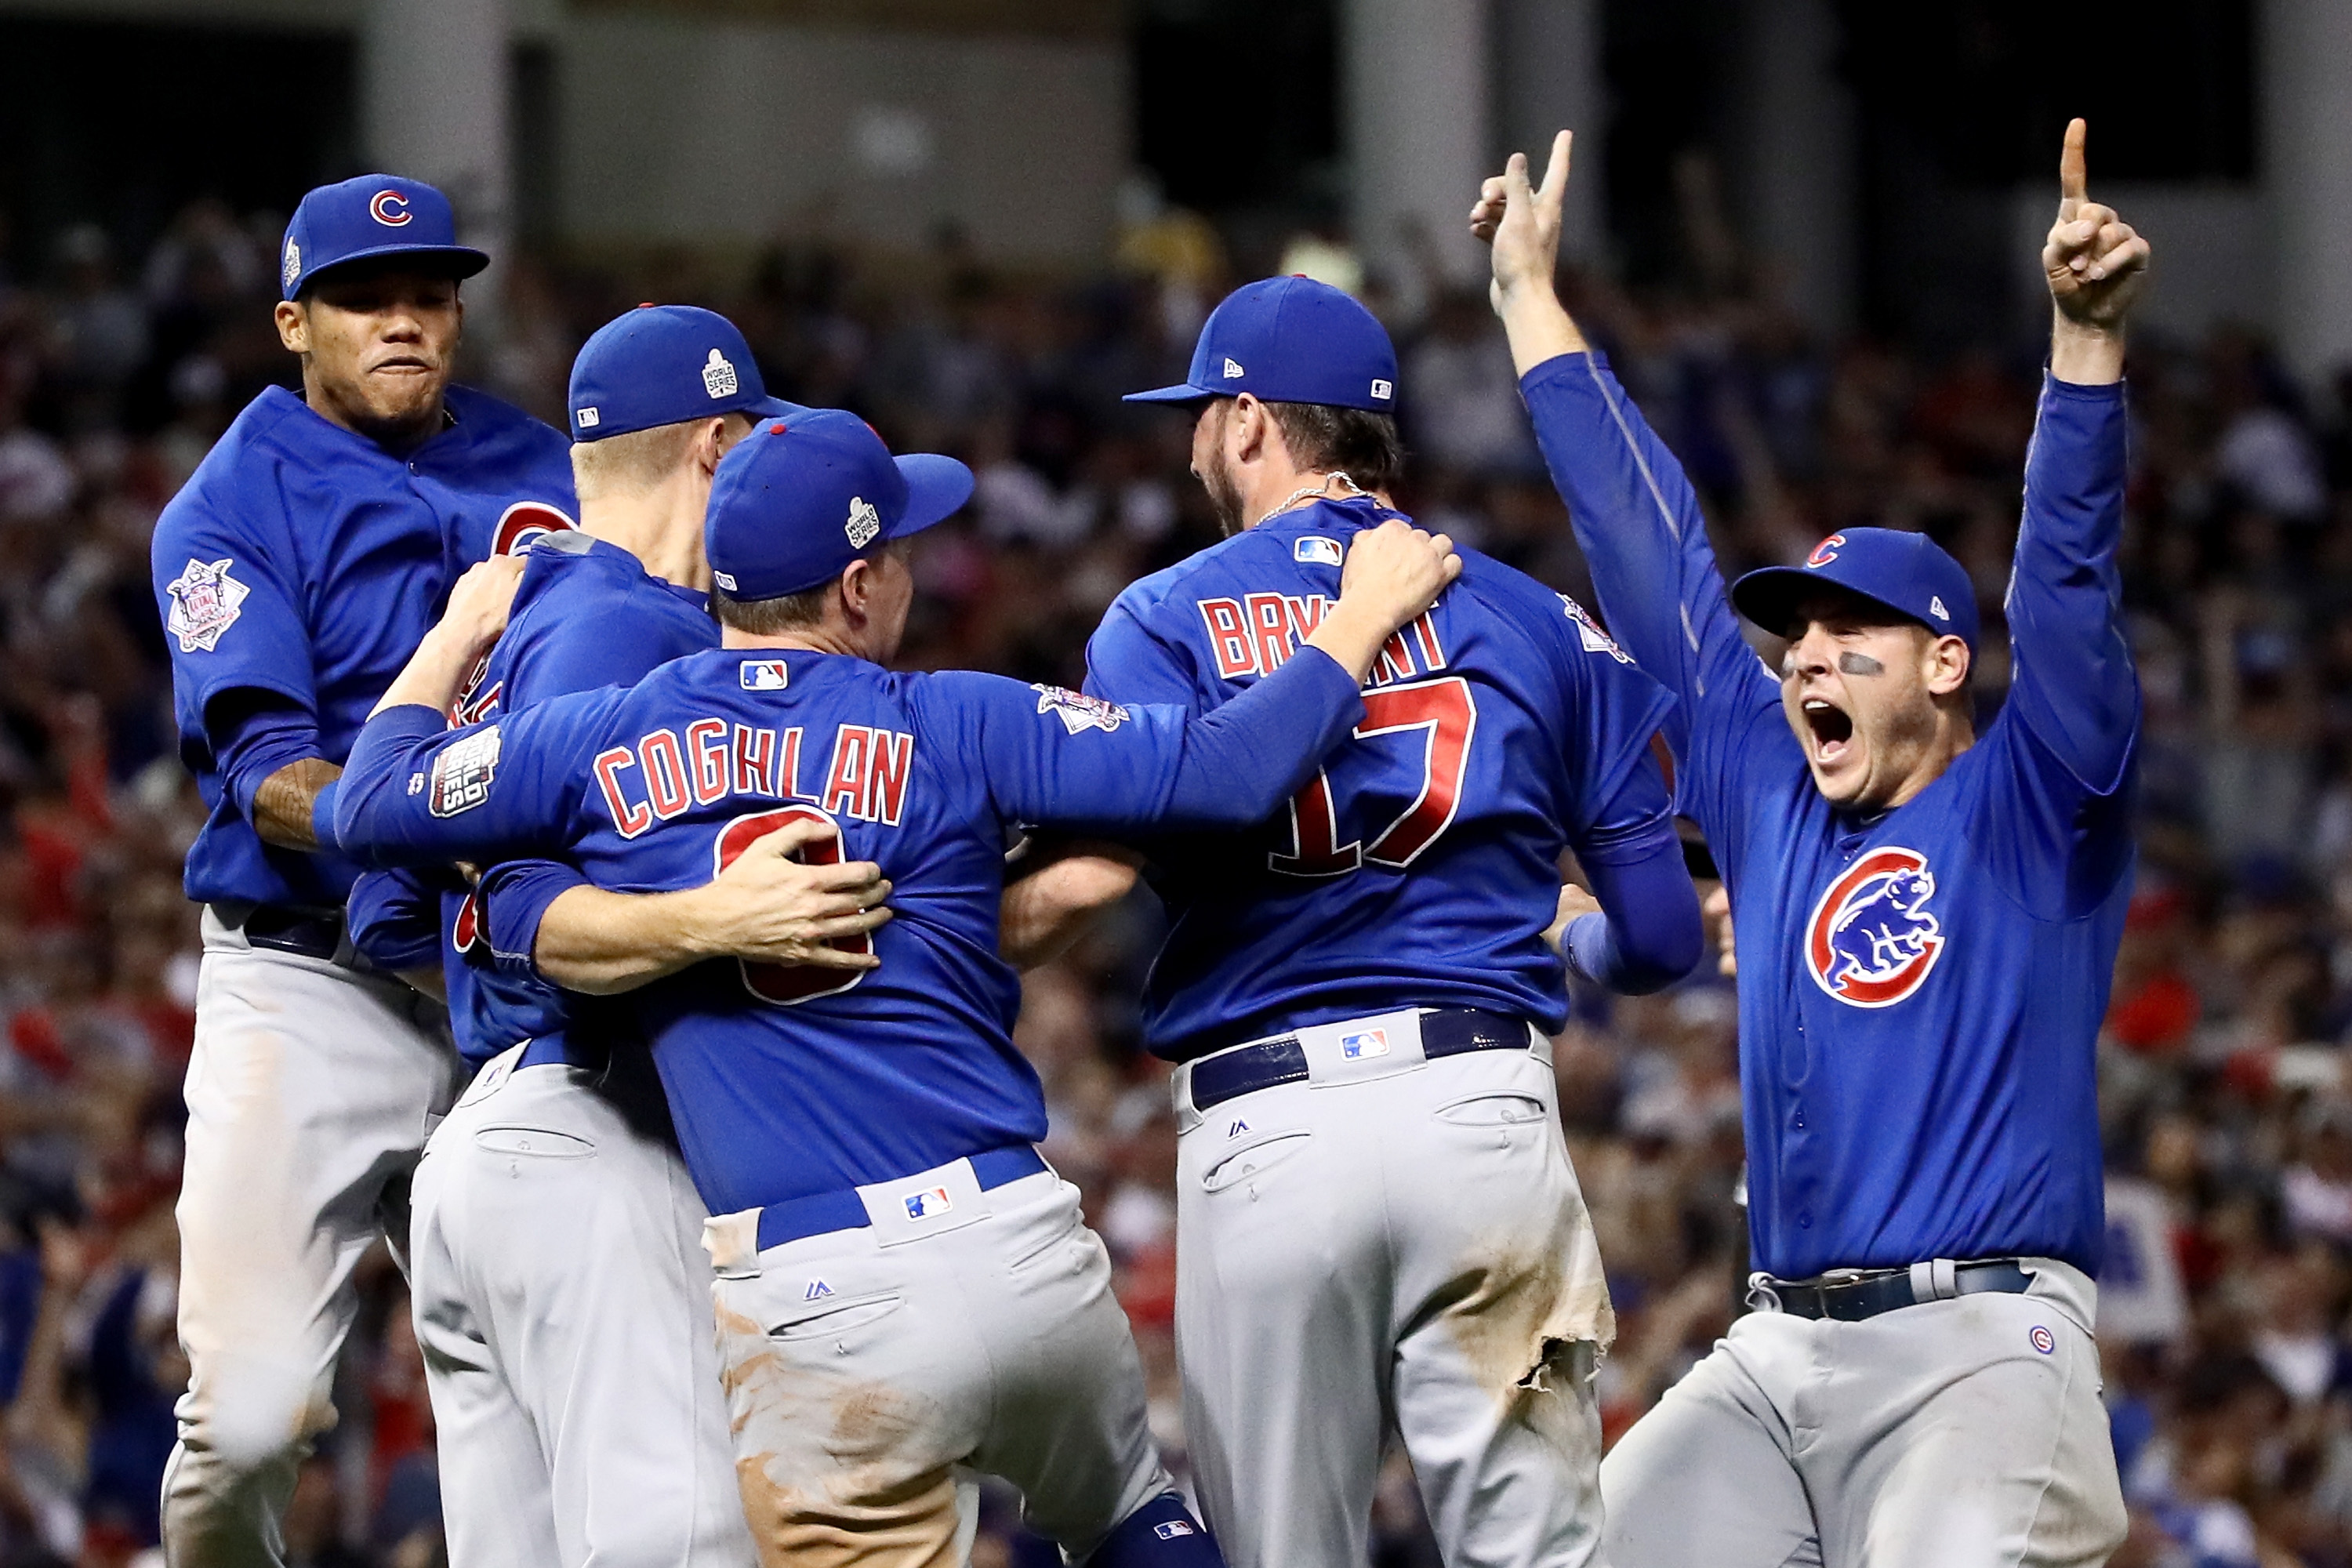 Cubs' World Series win means just as much for the entire sport of